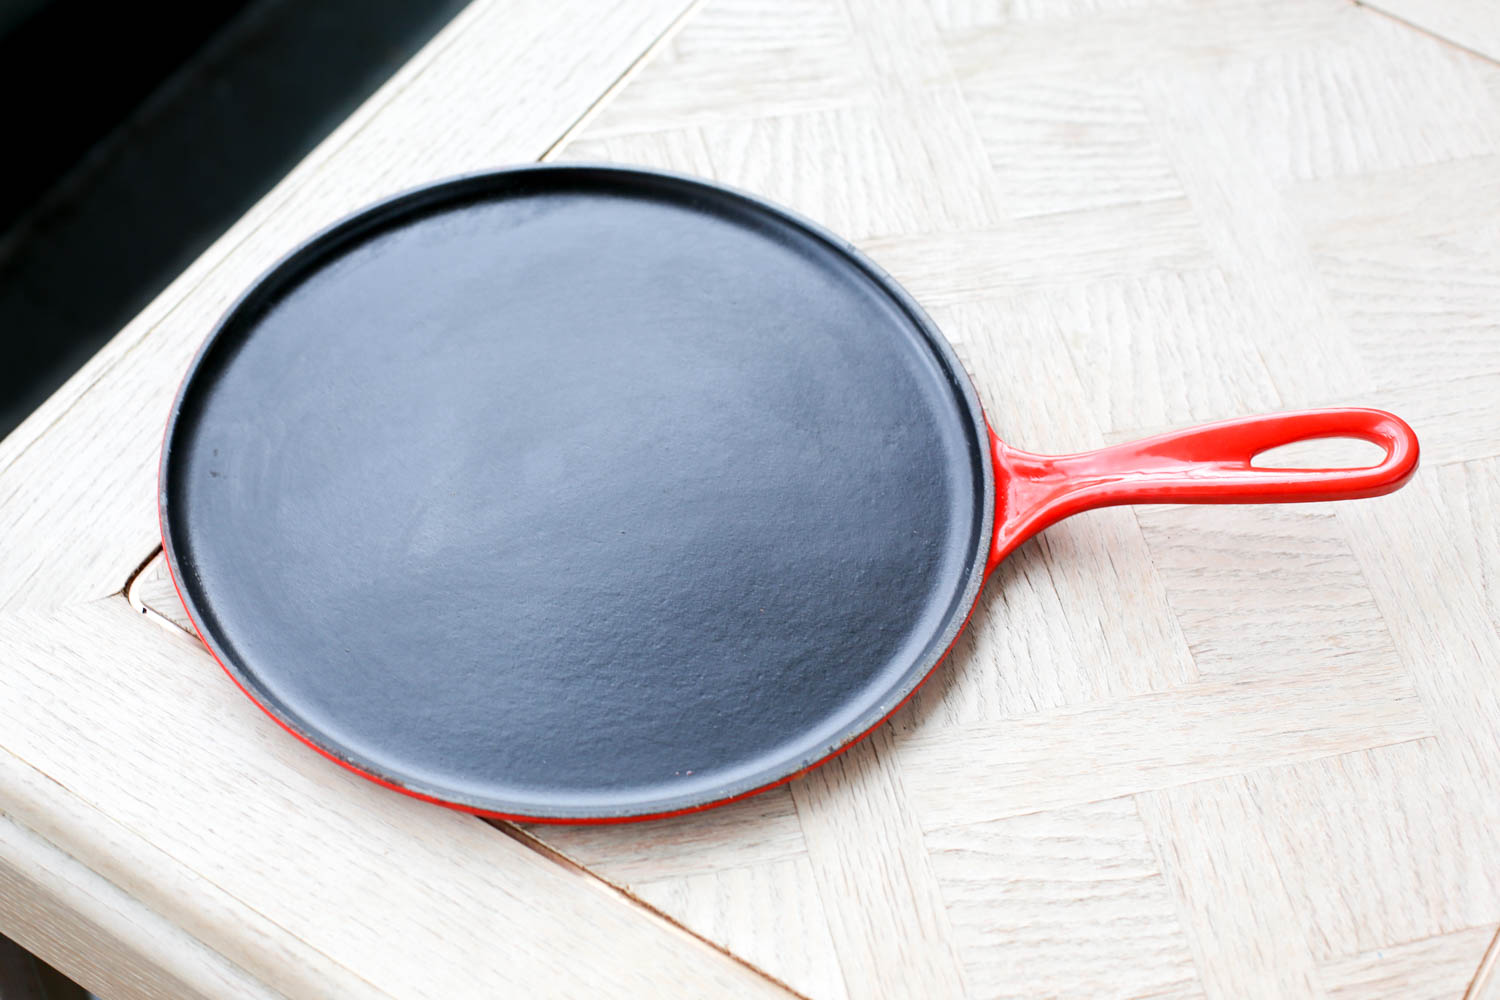 Le Creuset cast-iron crepe pan. Comes with a wooden rake, spatula, and several crepe recipes. Available at Amazon and Sur La Table.